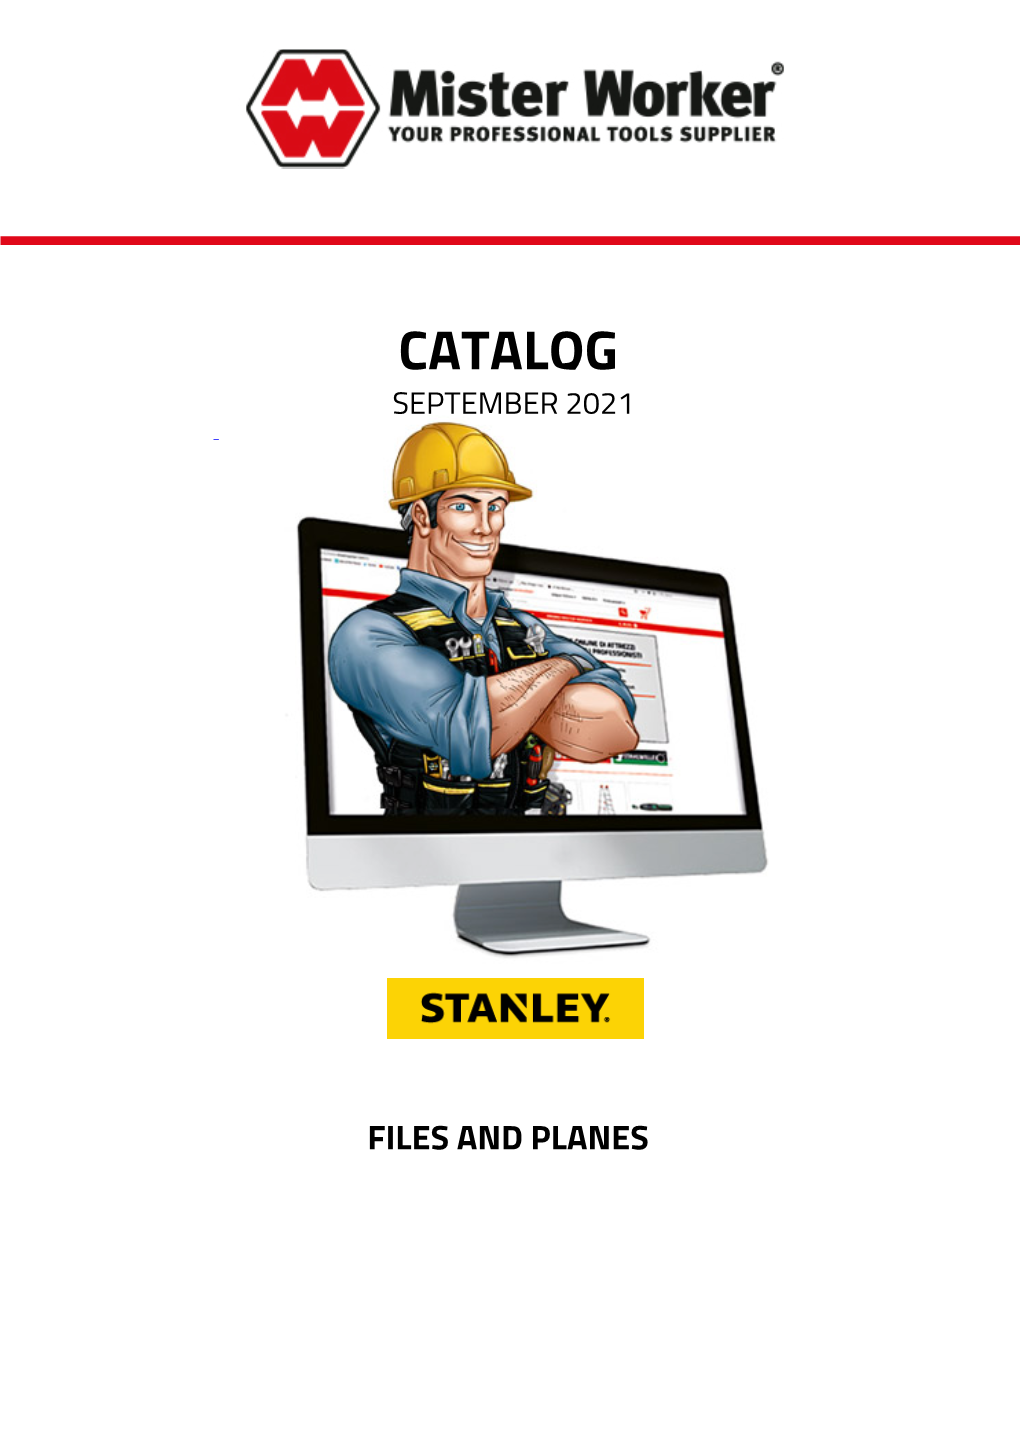 Files and Planes Catalog Files and Planes Files